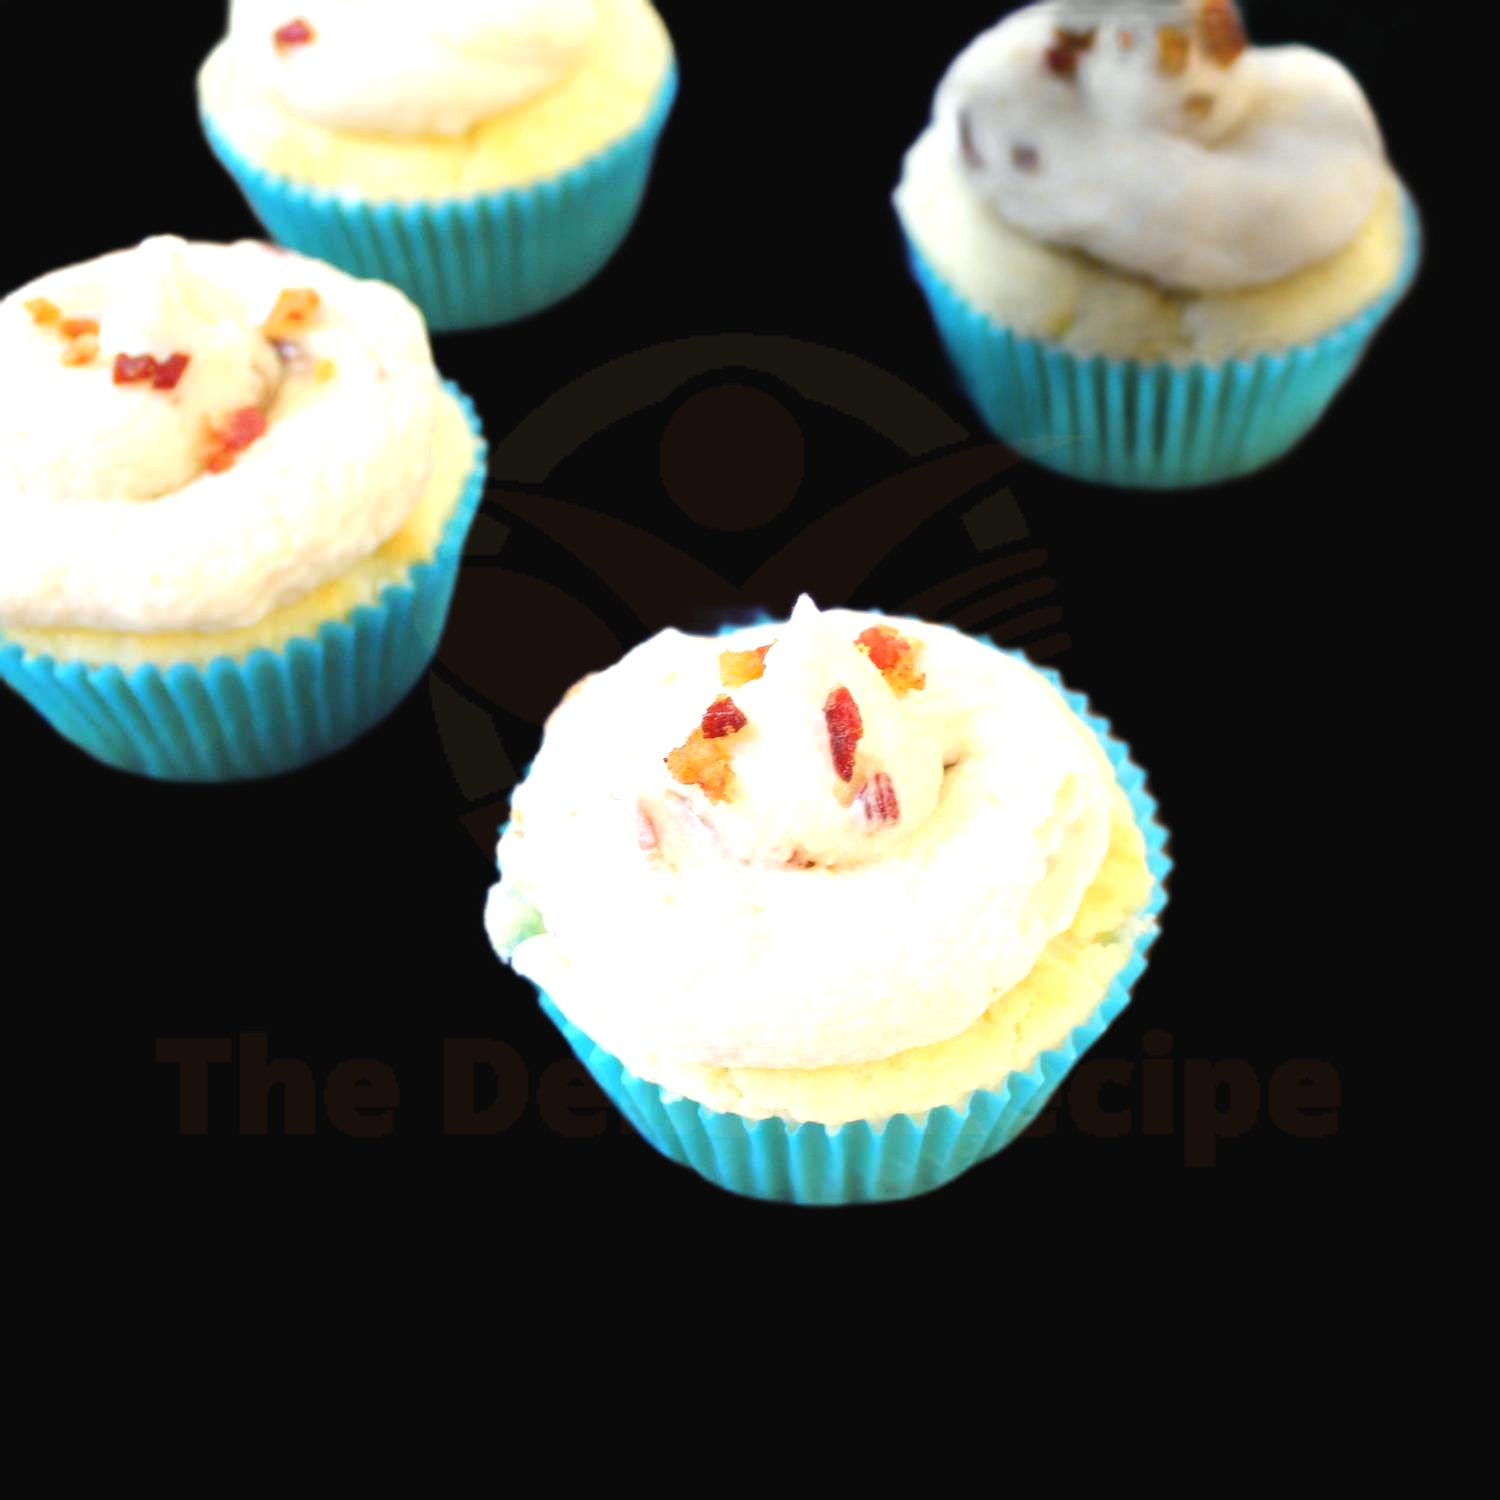 Pancake Cupcakes with Maple Bacon Buttercream Frosting